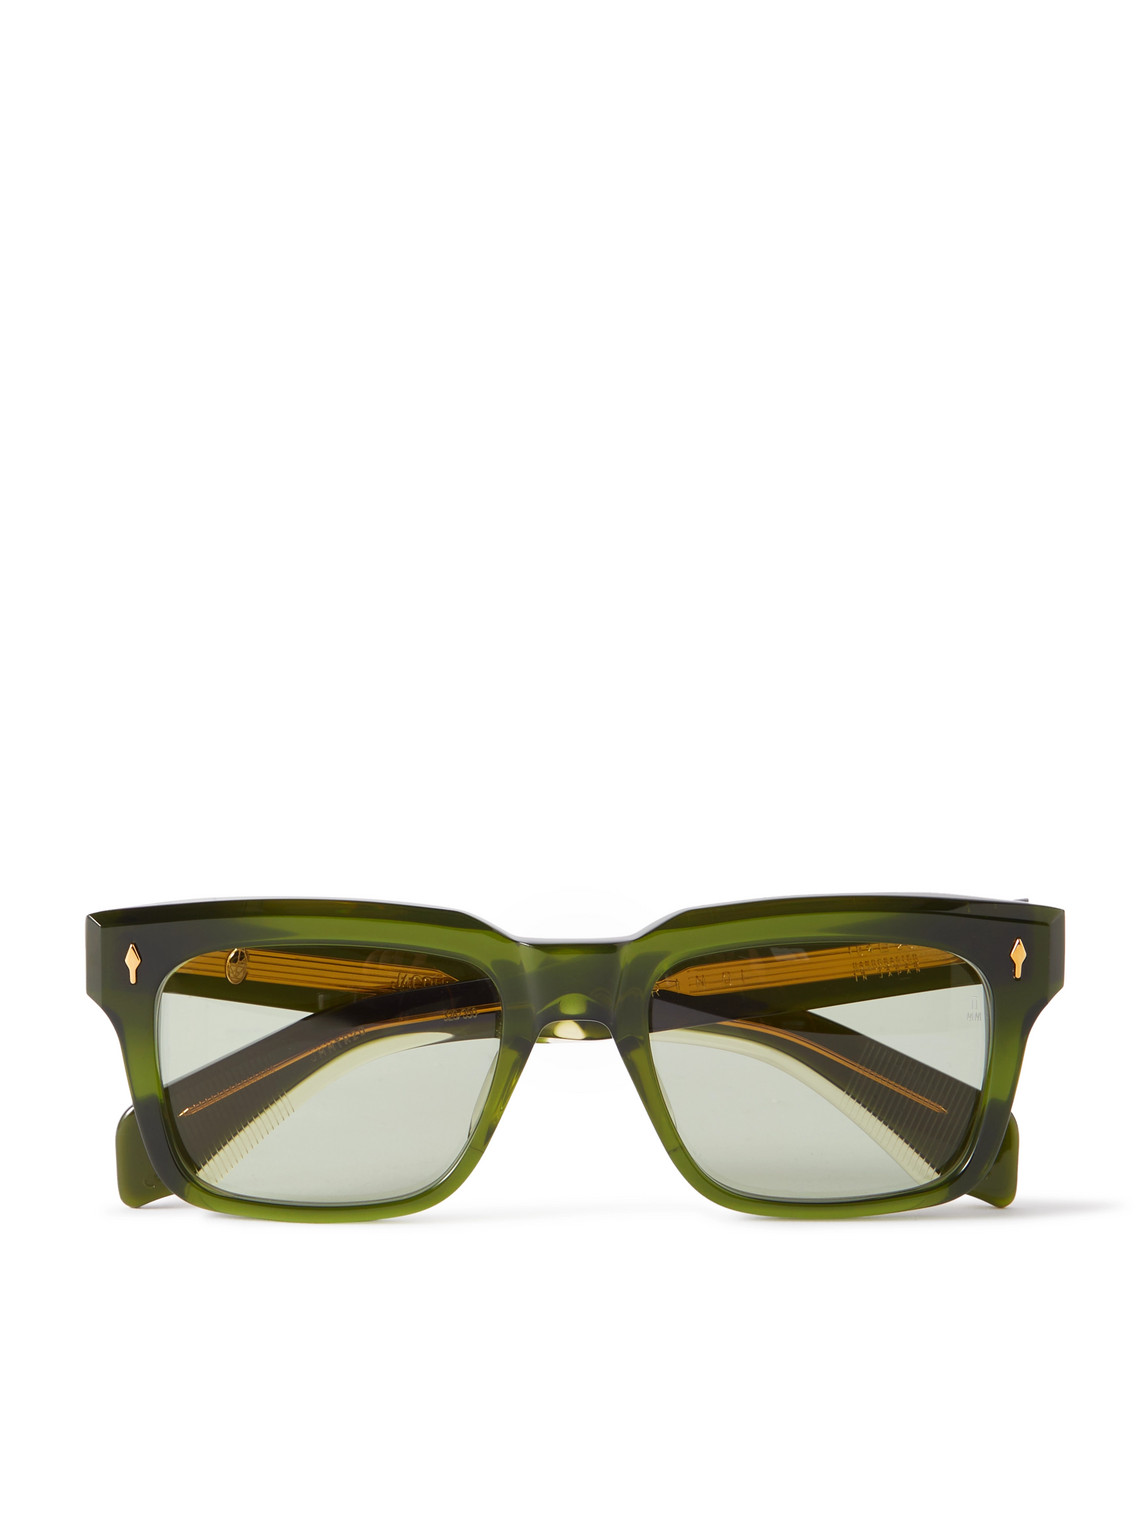 Jacques Marie Mage Torino D-frame Acetate Sunglasses In Green